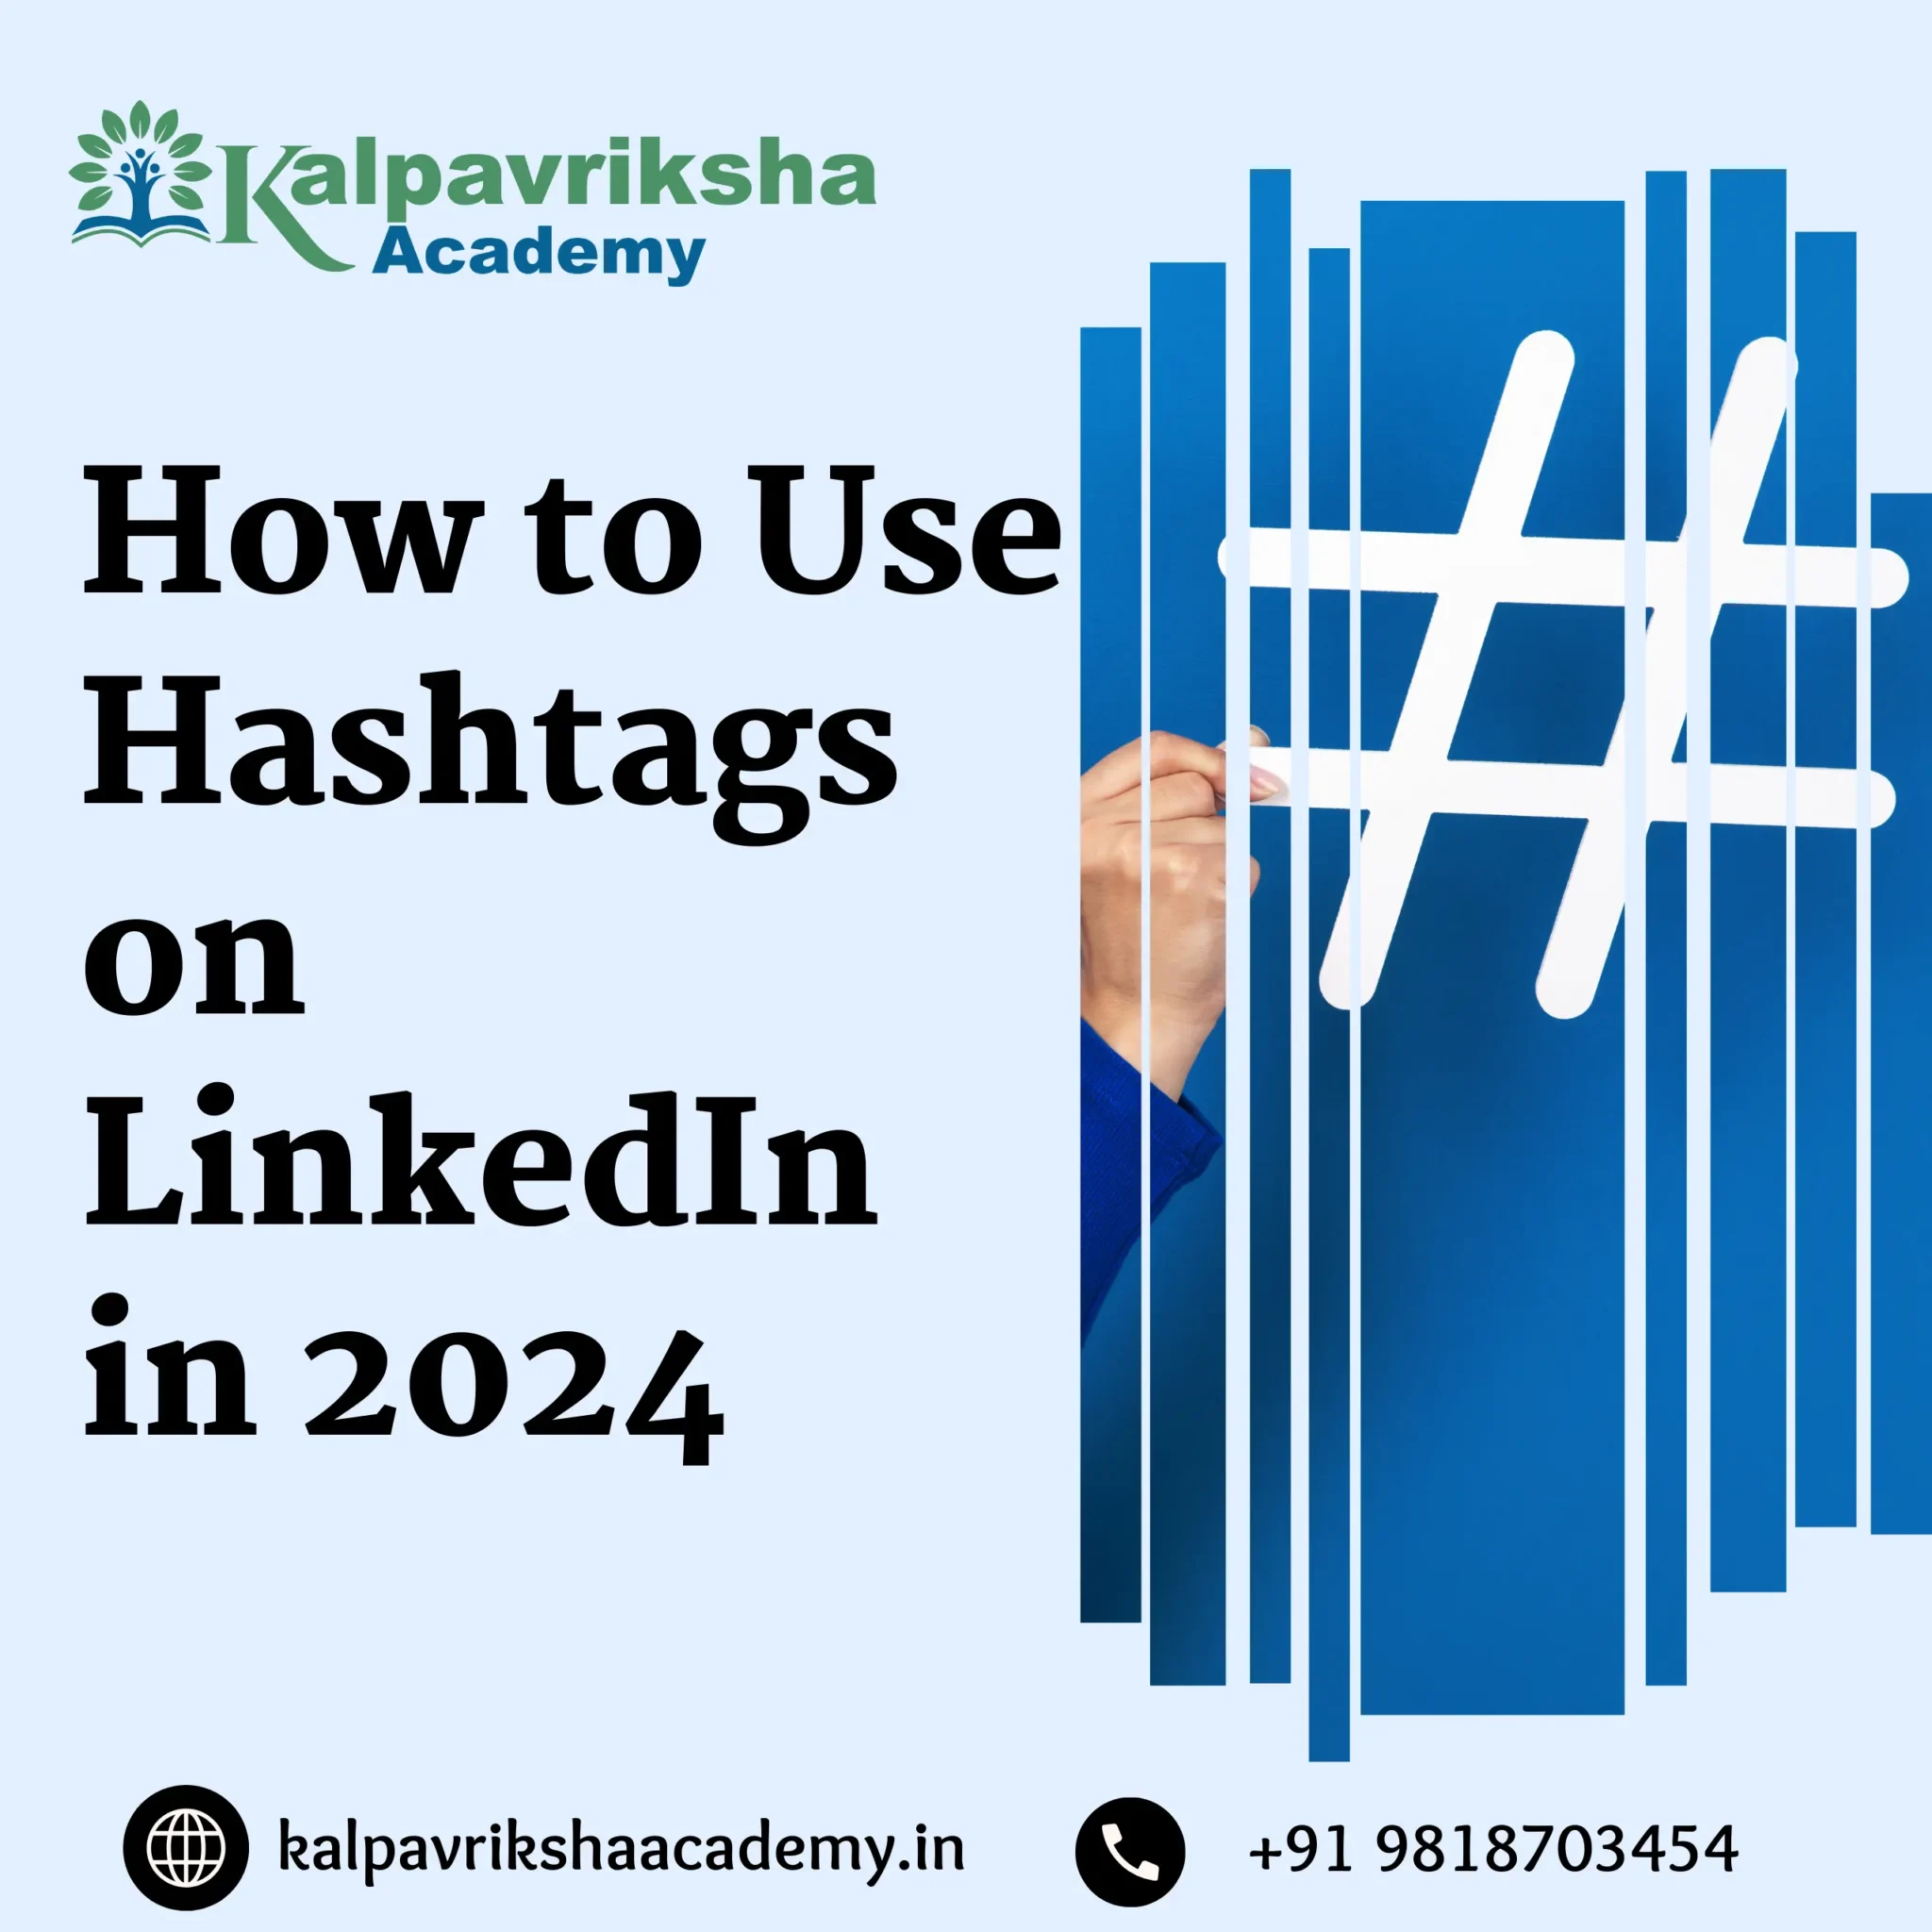 How to Use Hashtags on LinkedIn in 2024